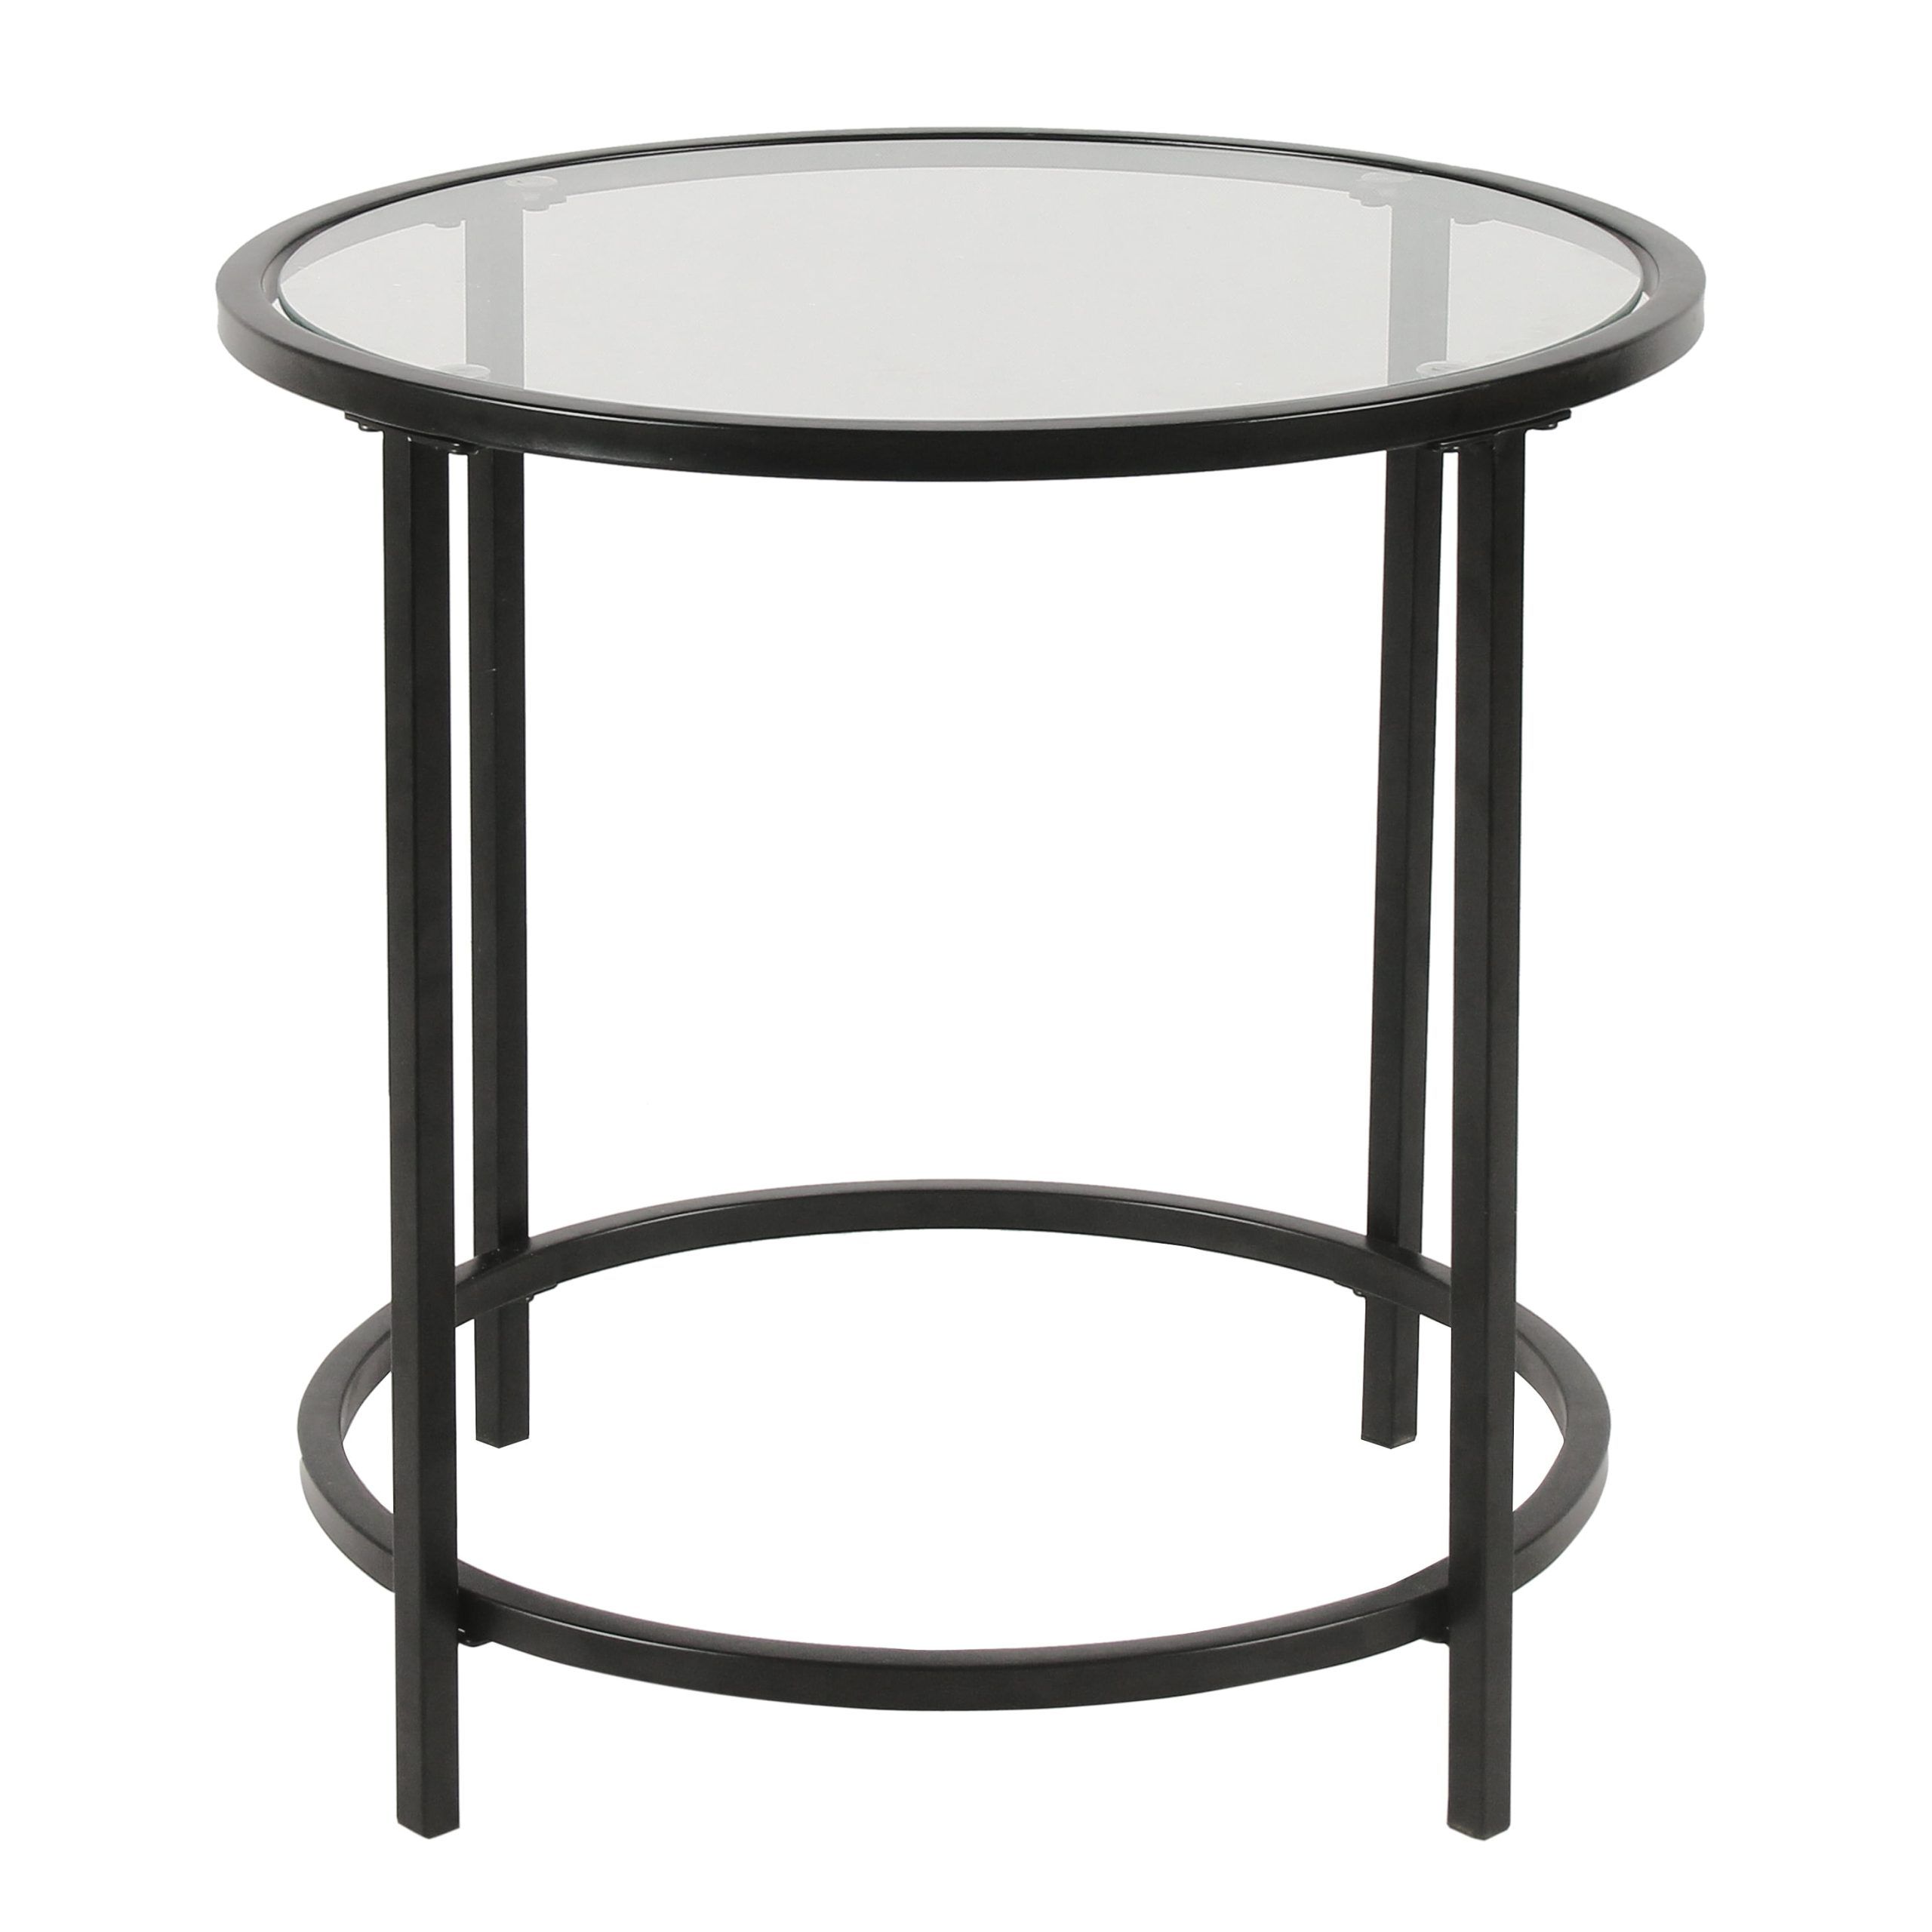 Homepop Round Metal Accent Table With Glass Top, Black – Walmart Throughout Metal Side Tables For Living Spaces (Gallery 14 of 20)